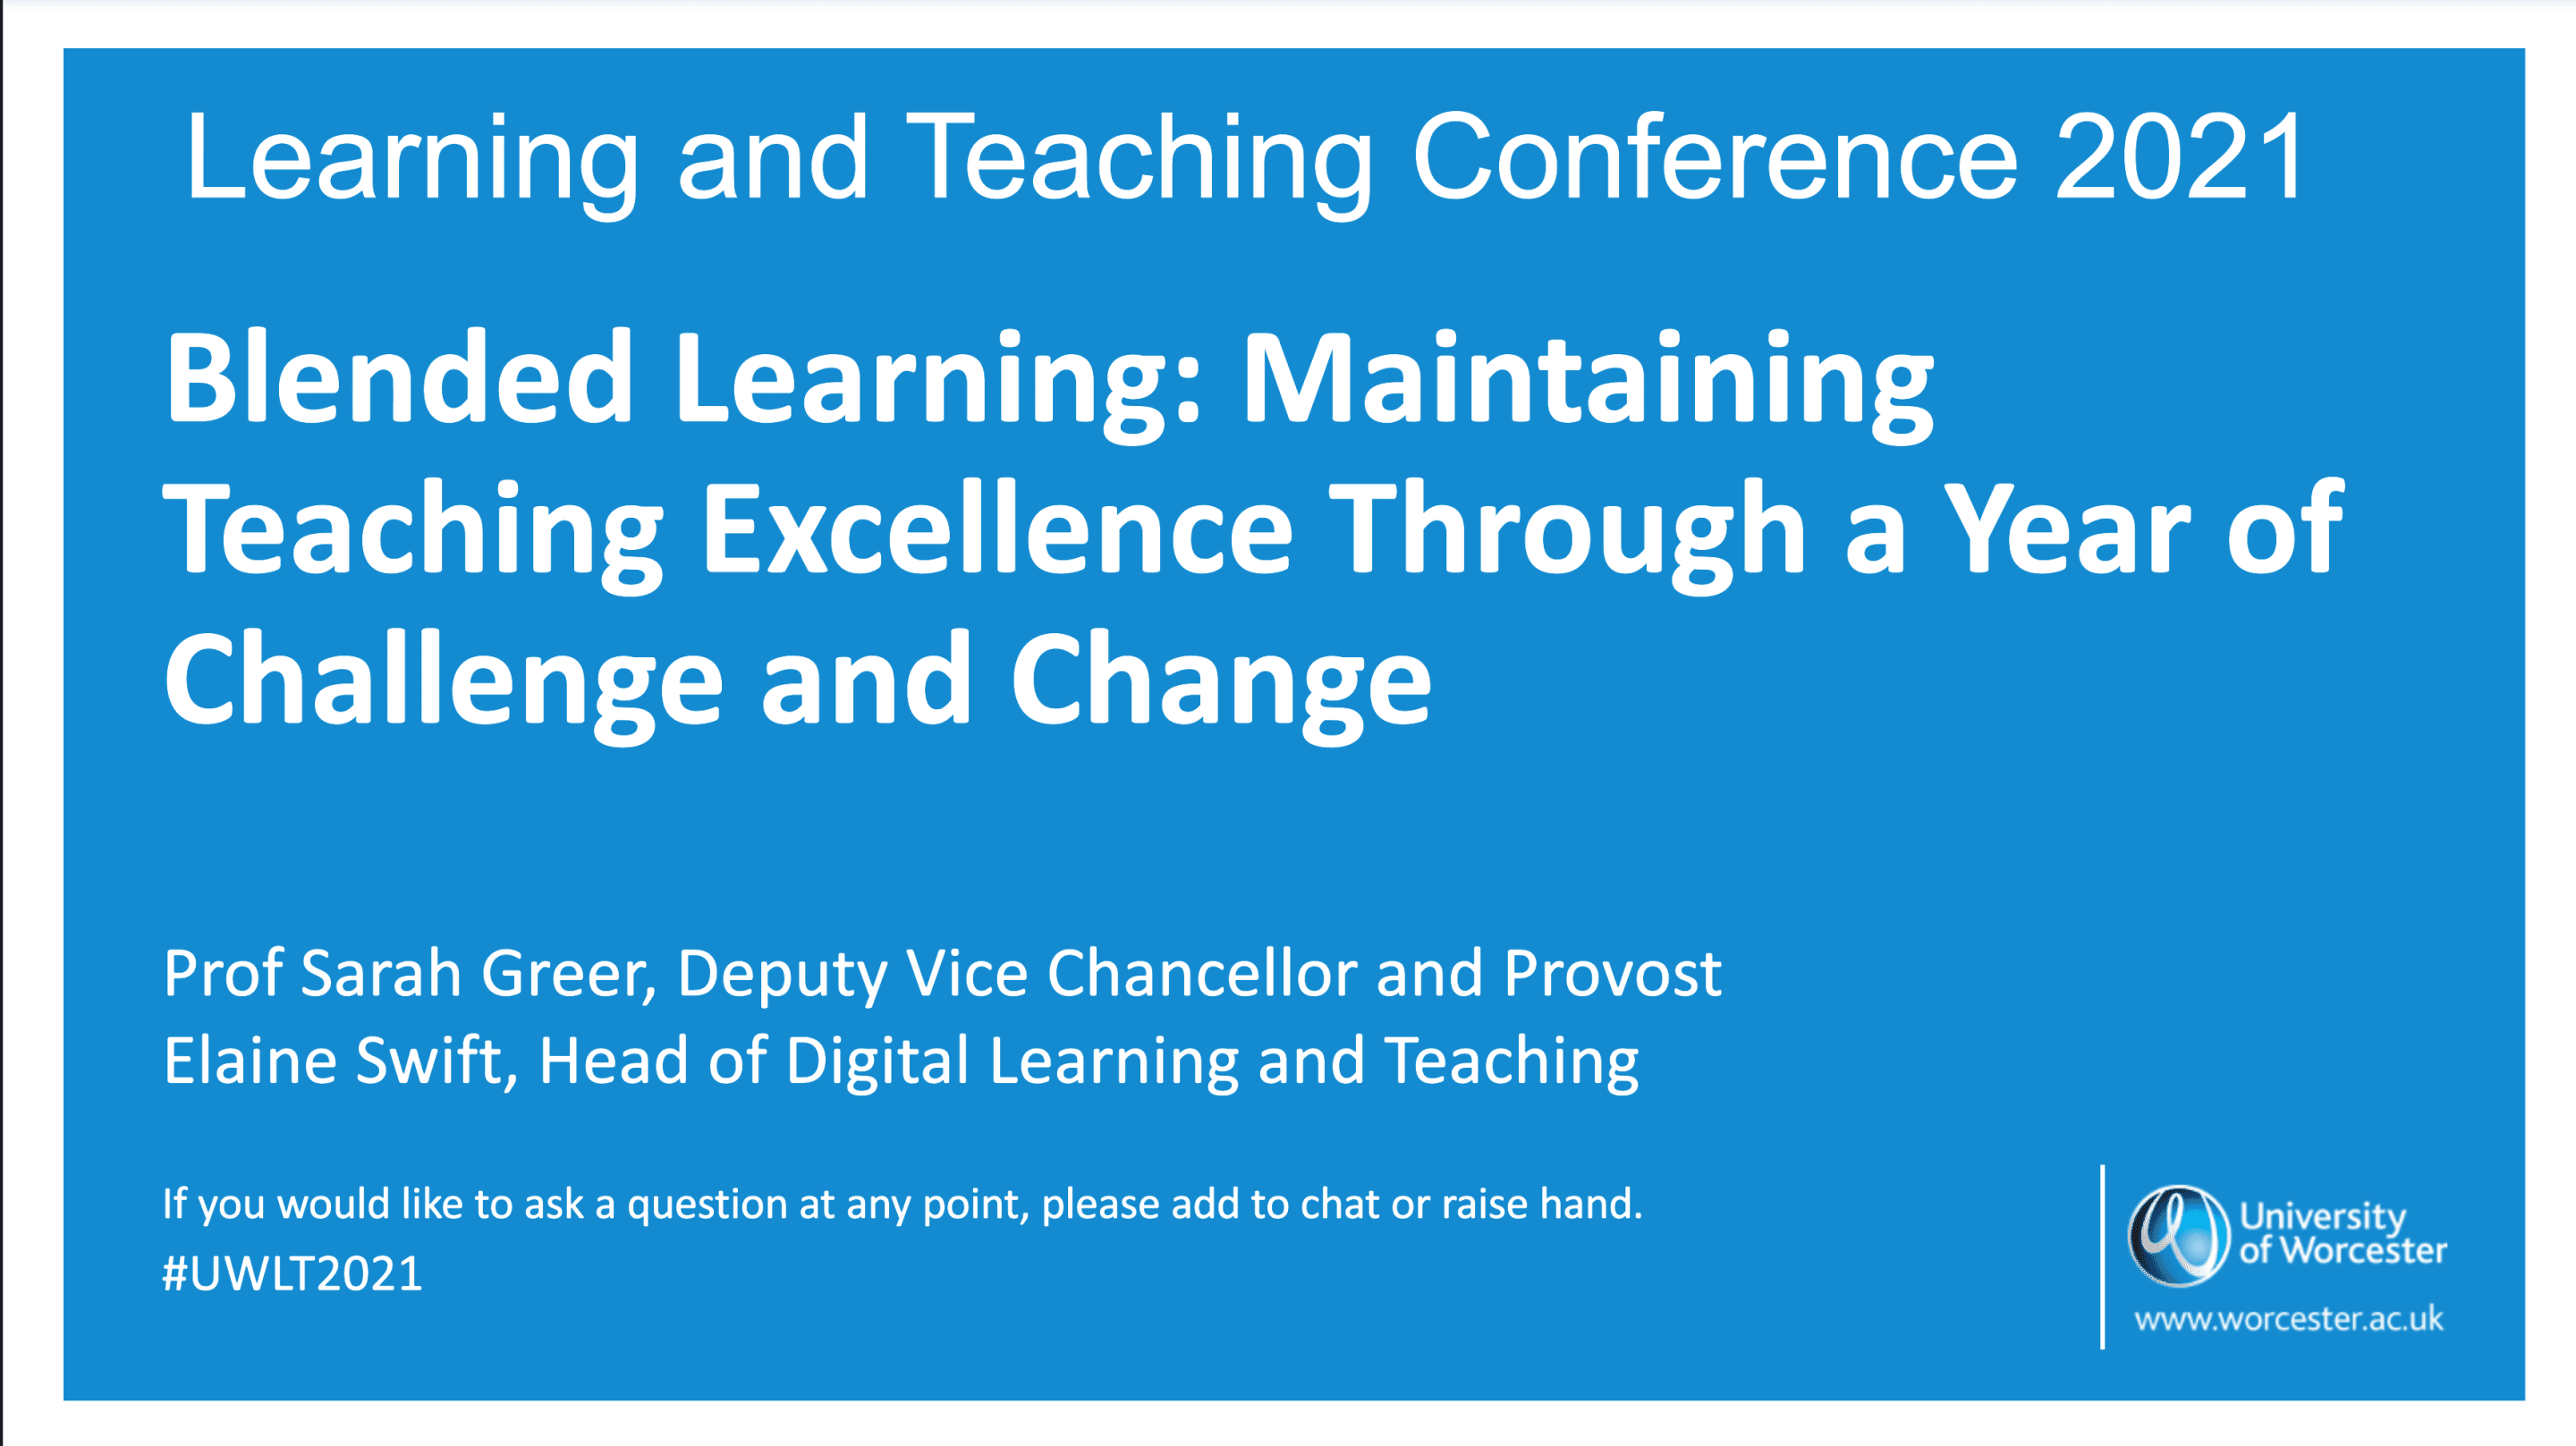 Maintaining Teaching Excellence Through a Year of Challenge and Change